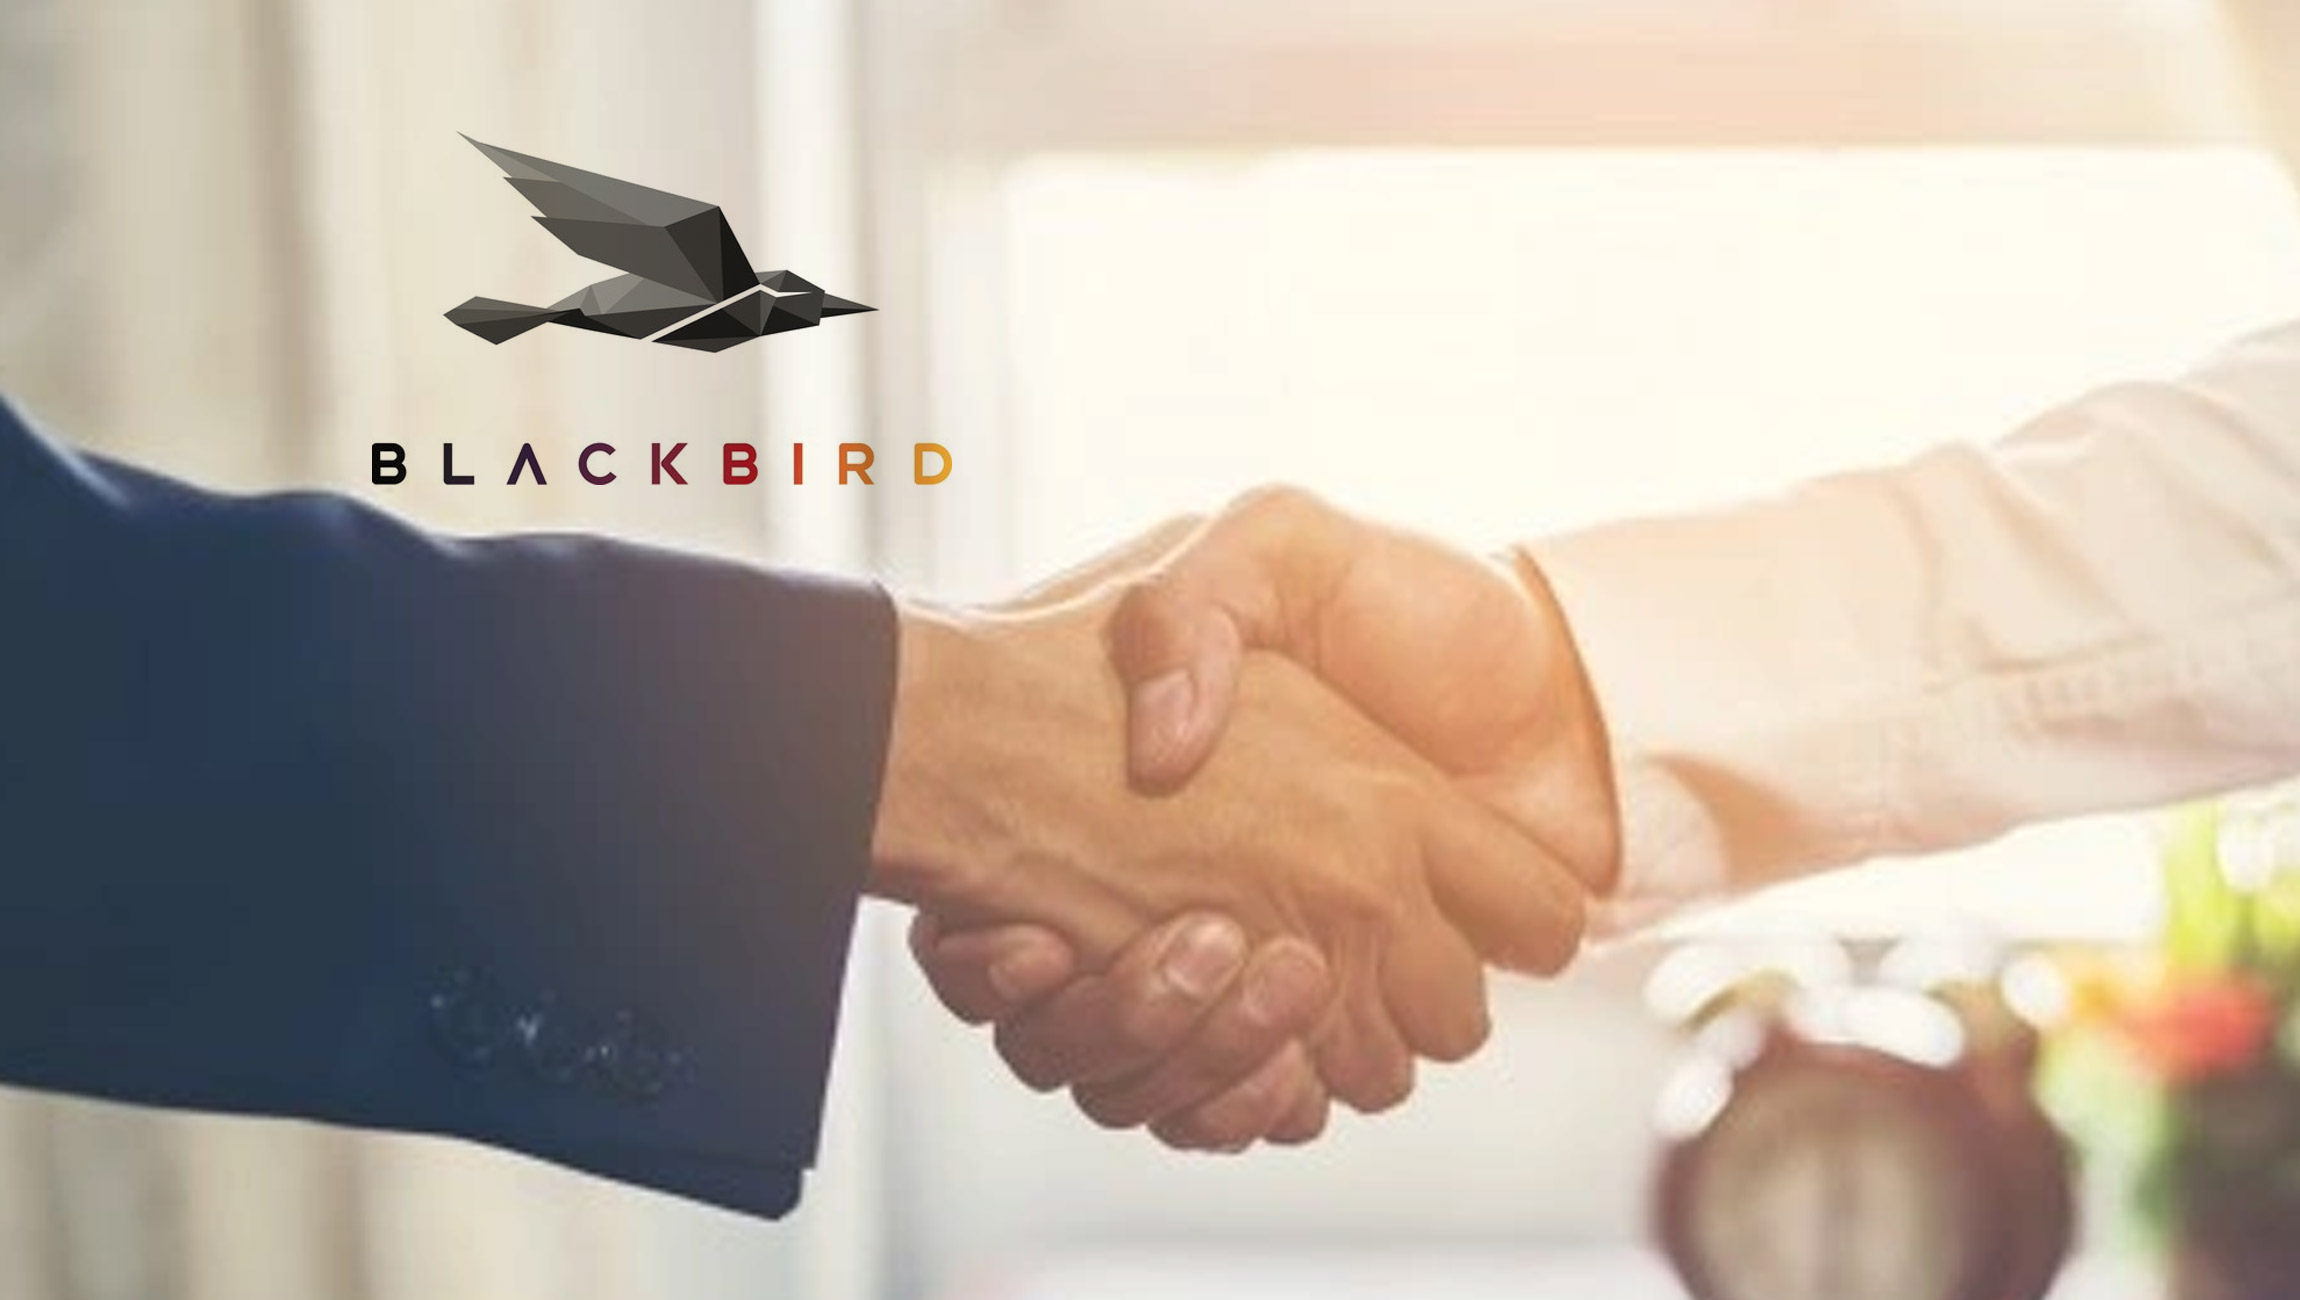 Blackbird-achieves-AWS-Technology-Partner-status-and-completes-Foundational-Technical-Review-to-accelerate-AWS-engagement